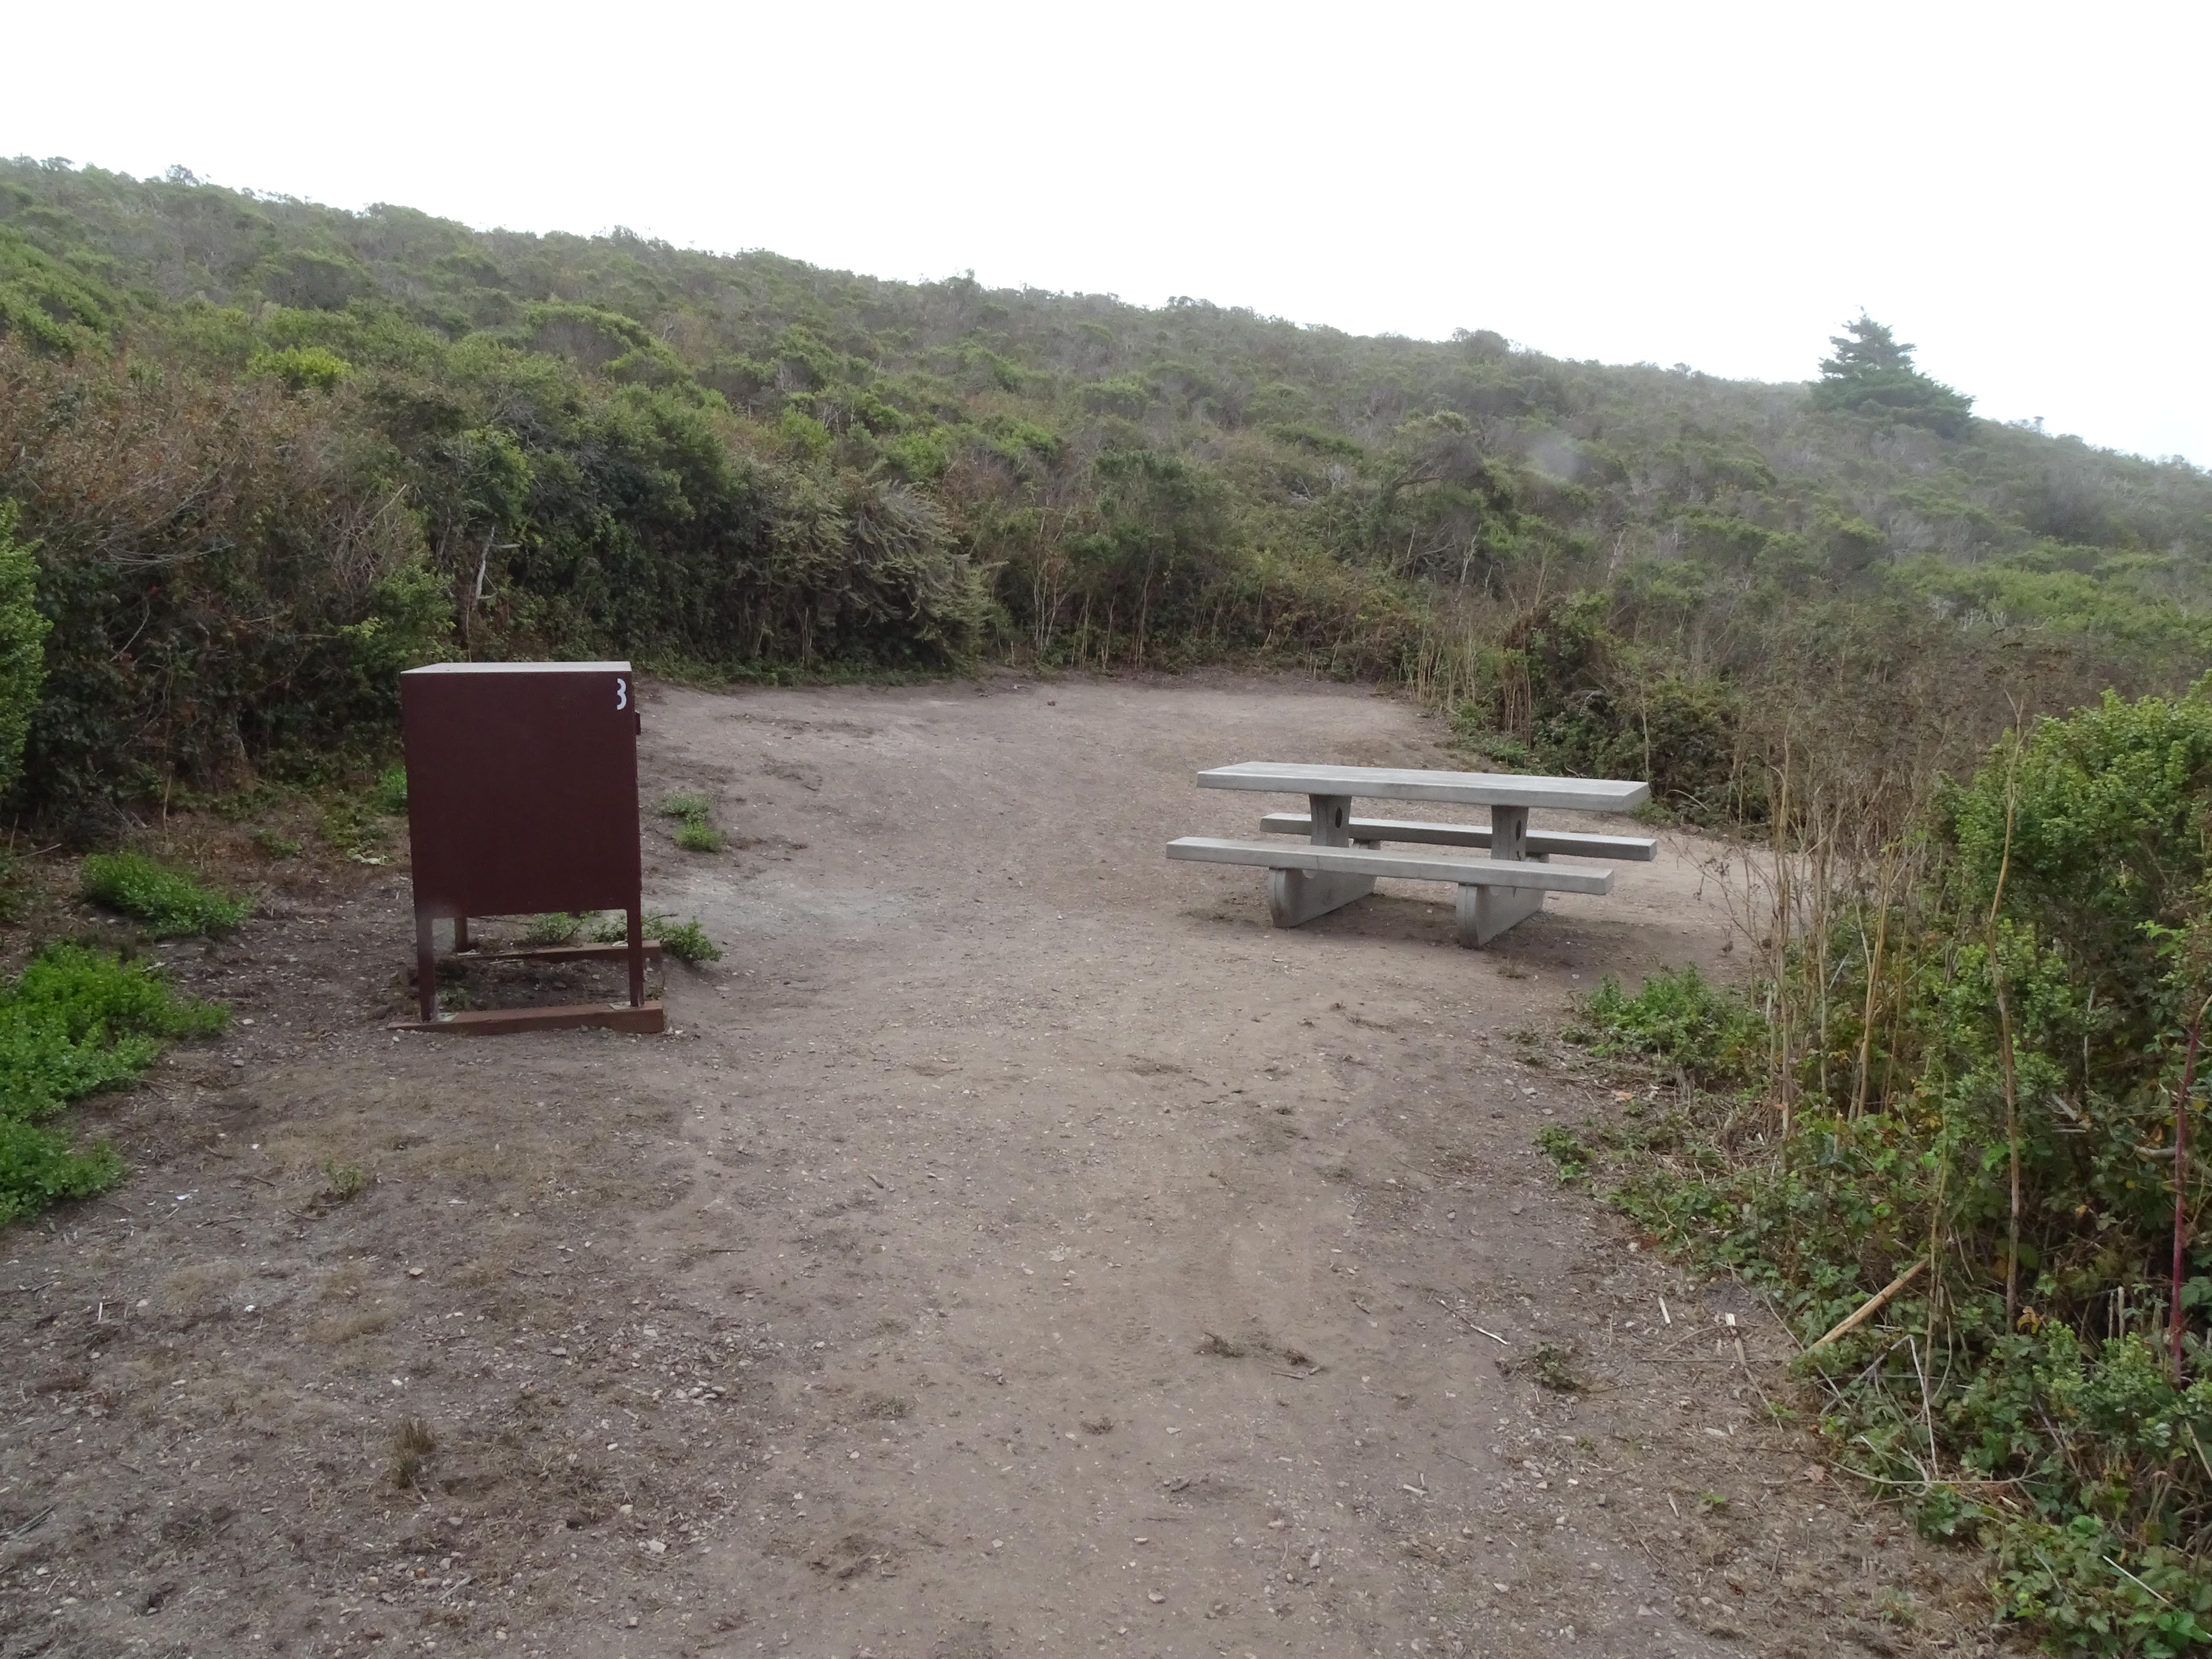 A campsite containing a picnic table and a food storage locker surrounded by shrubs.